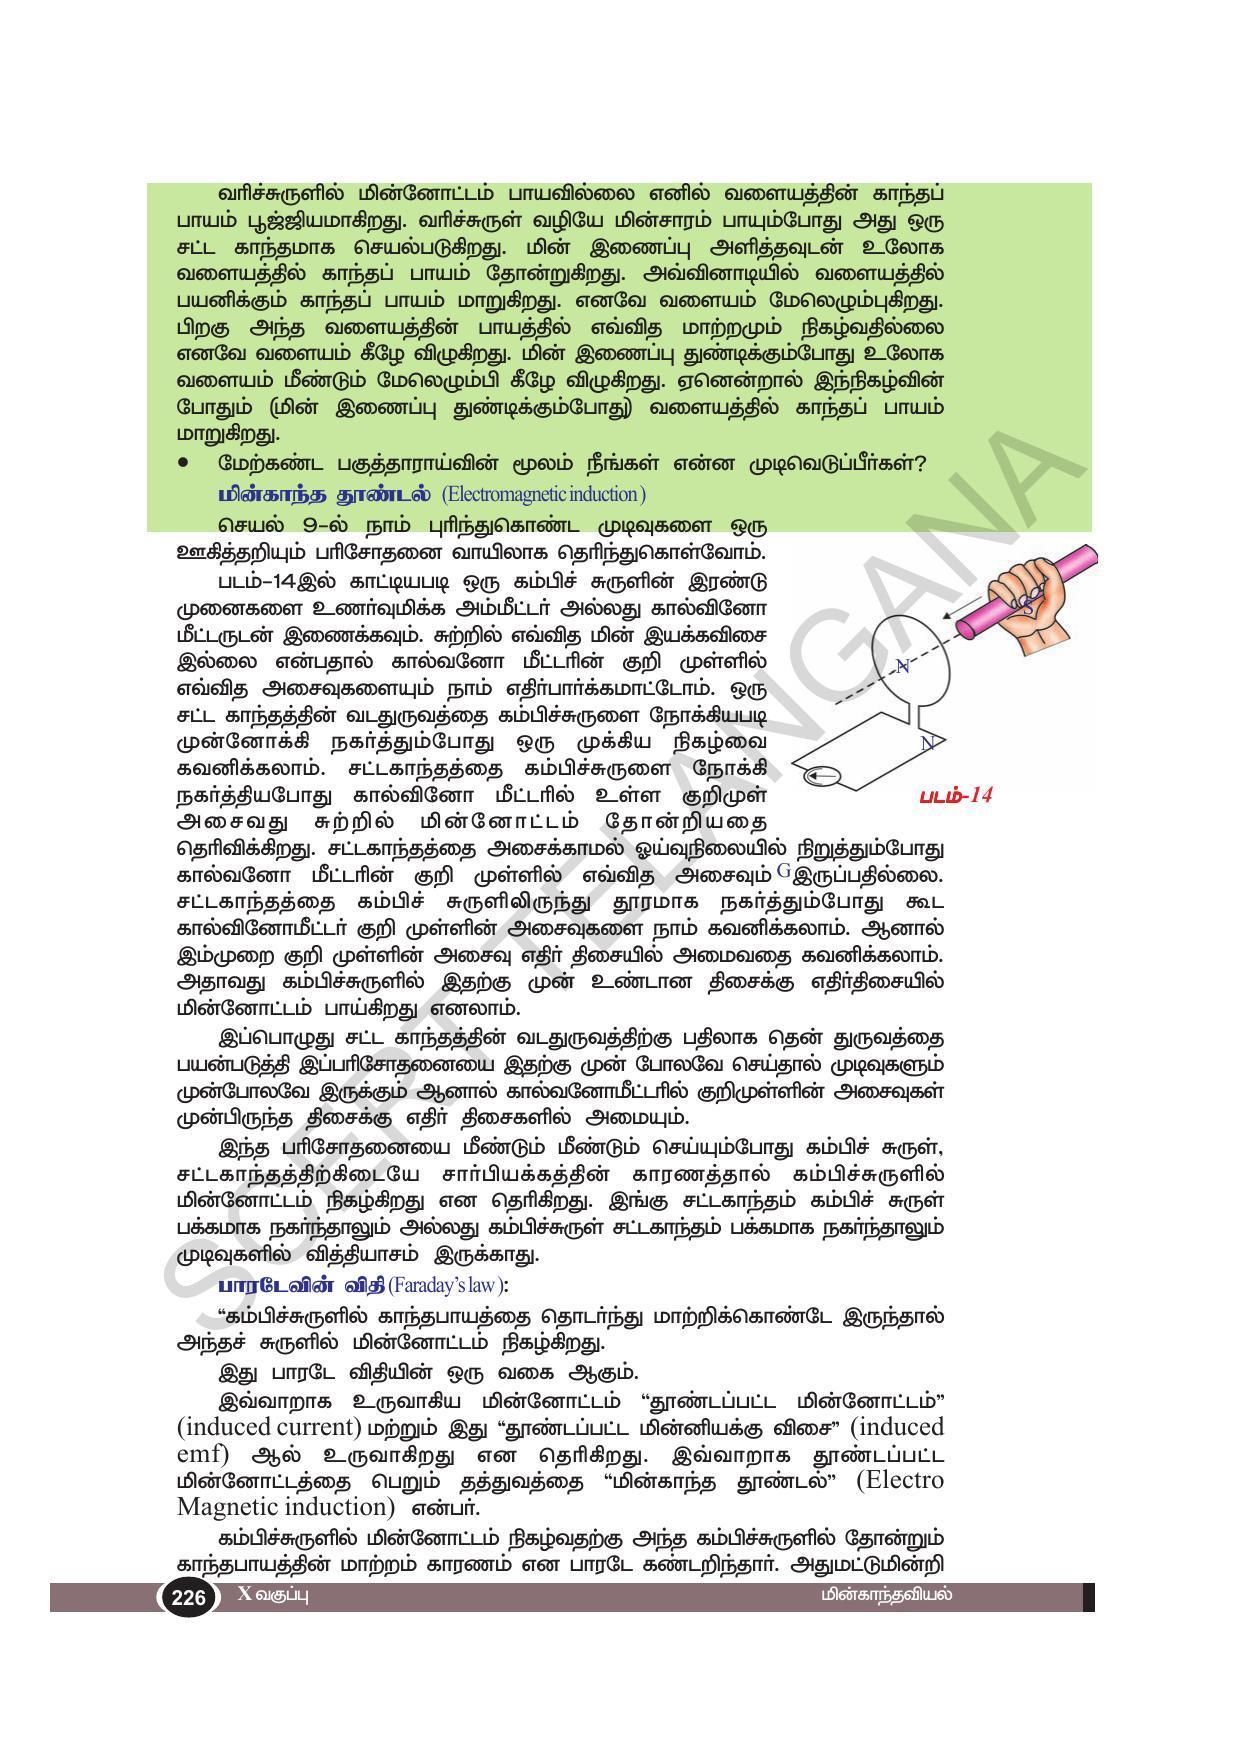 TS SCERT Class 10 Physical Science(Tamil Medium) Text Book - Page 238